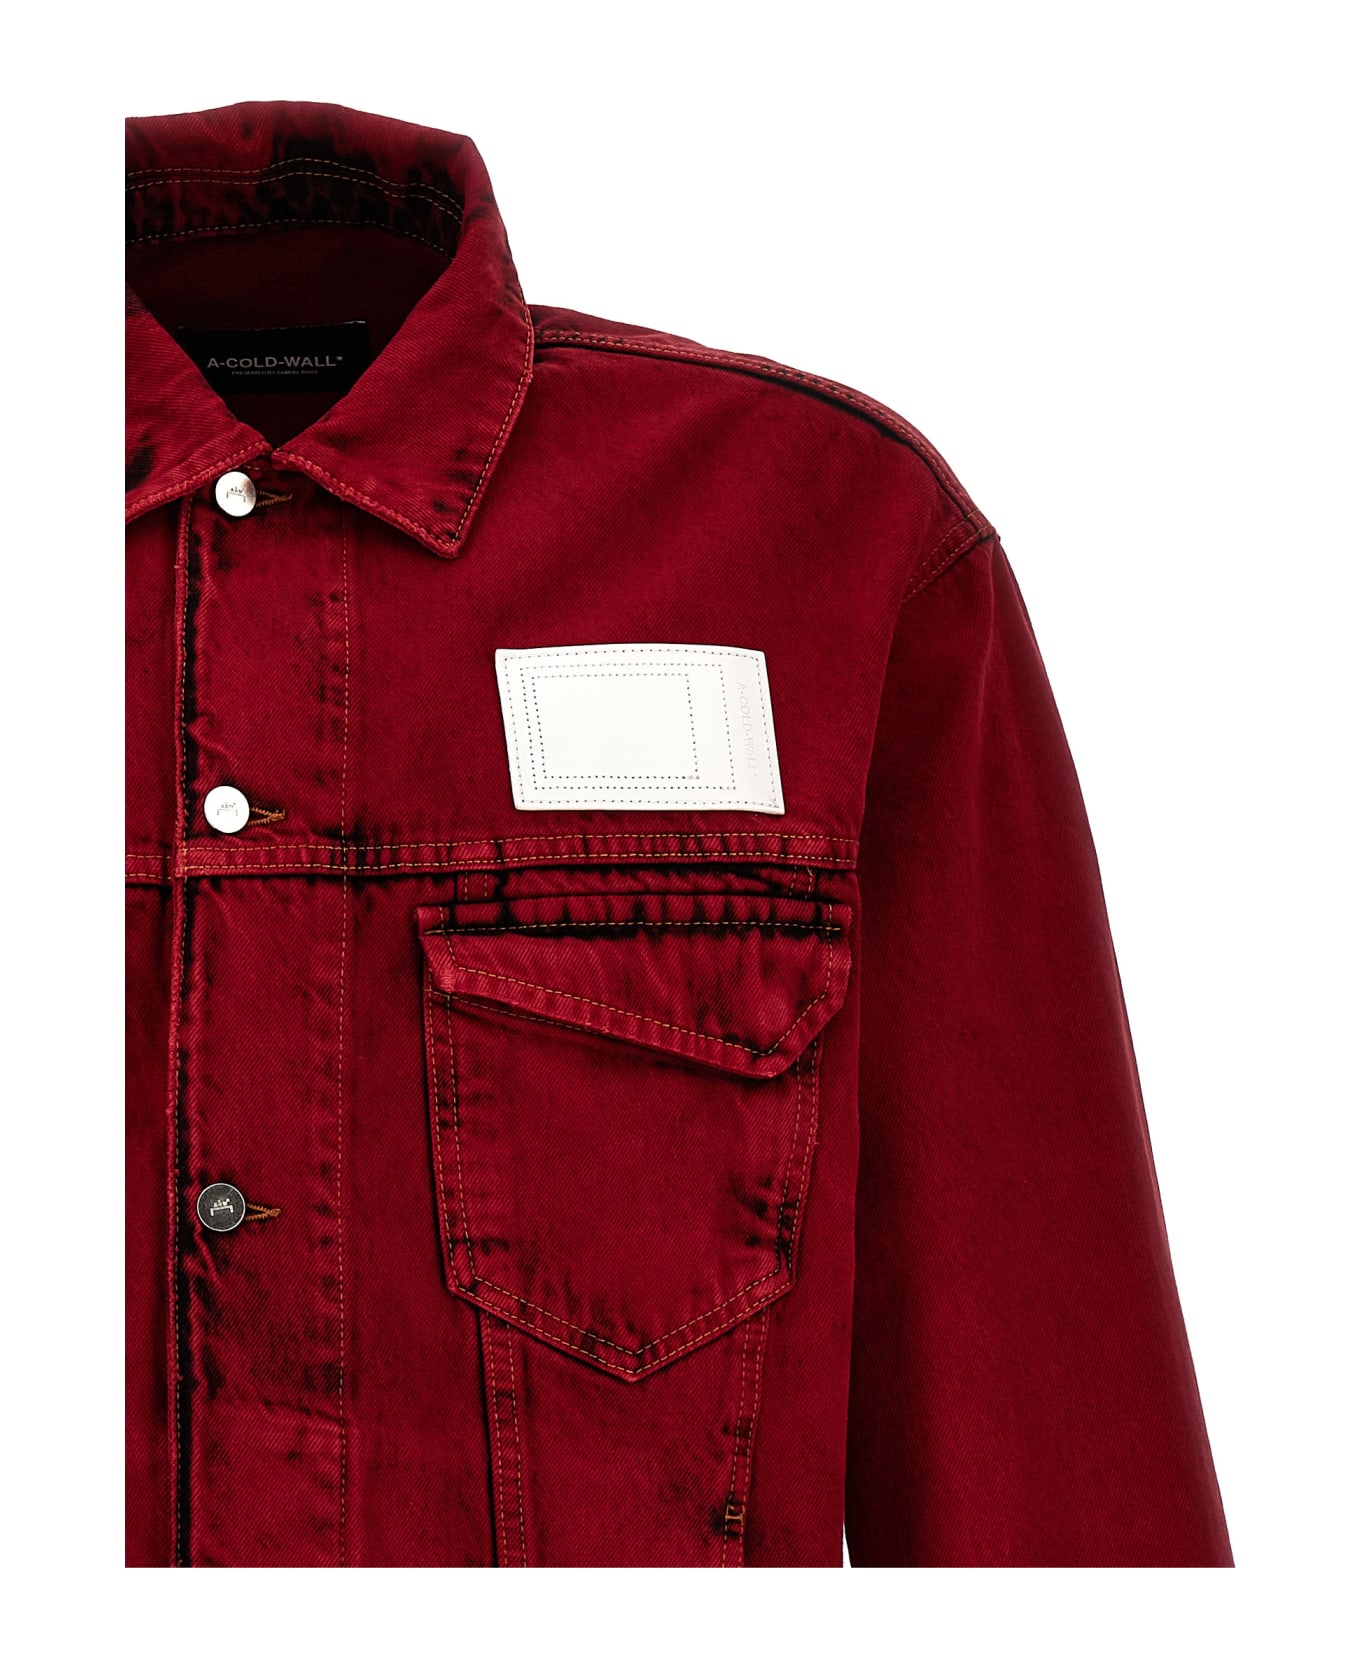 A-COLD-WALL 'strand Trucker' Jacket - Red ジャケット